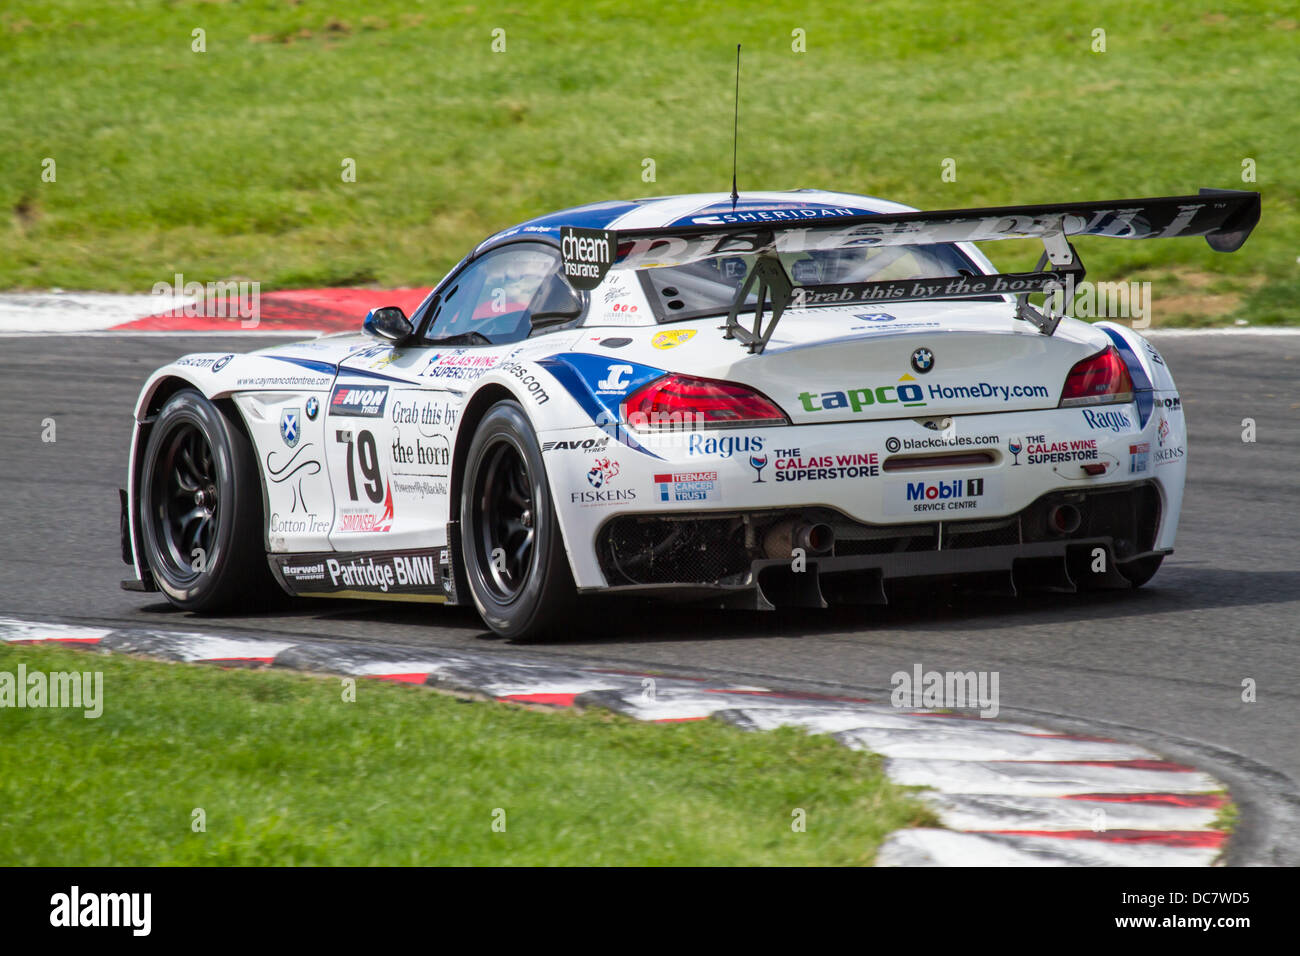 #79 - Ecurie Ecosse - BMW Z4 - Marco ATTARD / Oliver BRYANT exiting Surtees at Brands Hatch during BritishGT Stock Photo